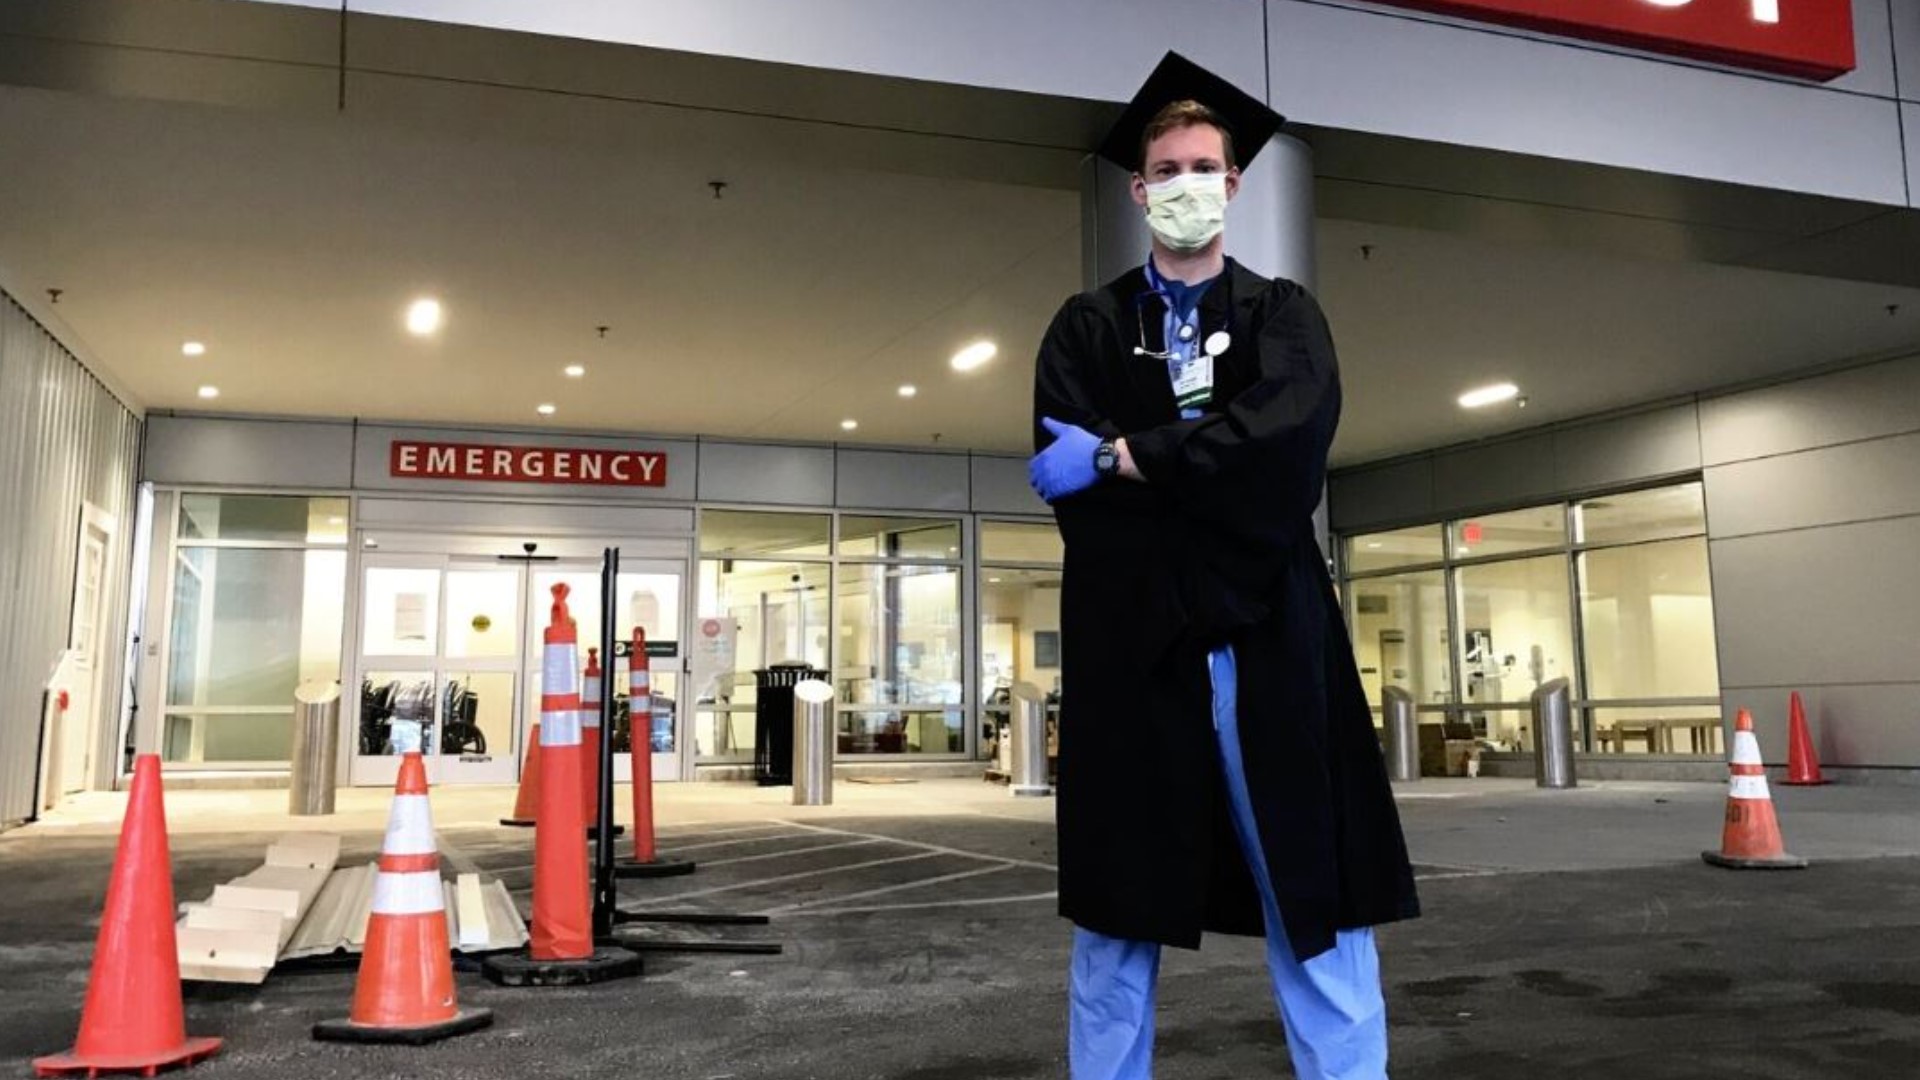 Have an old graduation gown hanging around? LCCC is participating in a nationwide project aimed at supporting healthcare workers during the pandemic.